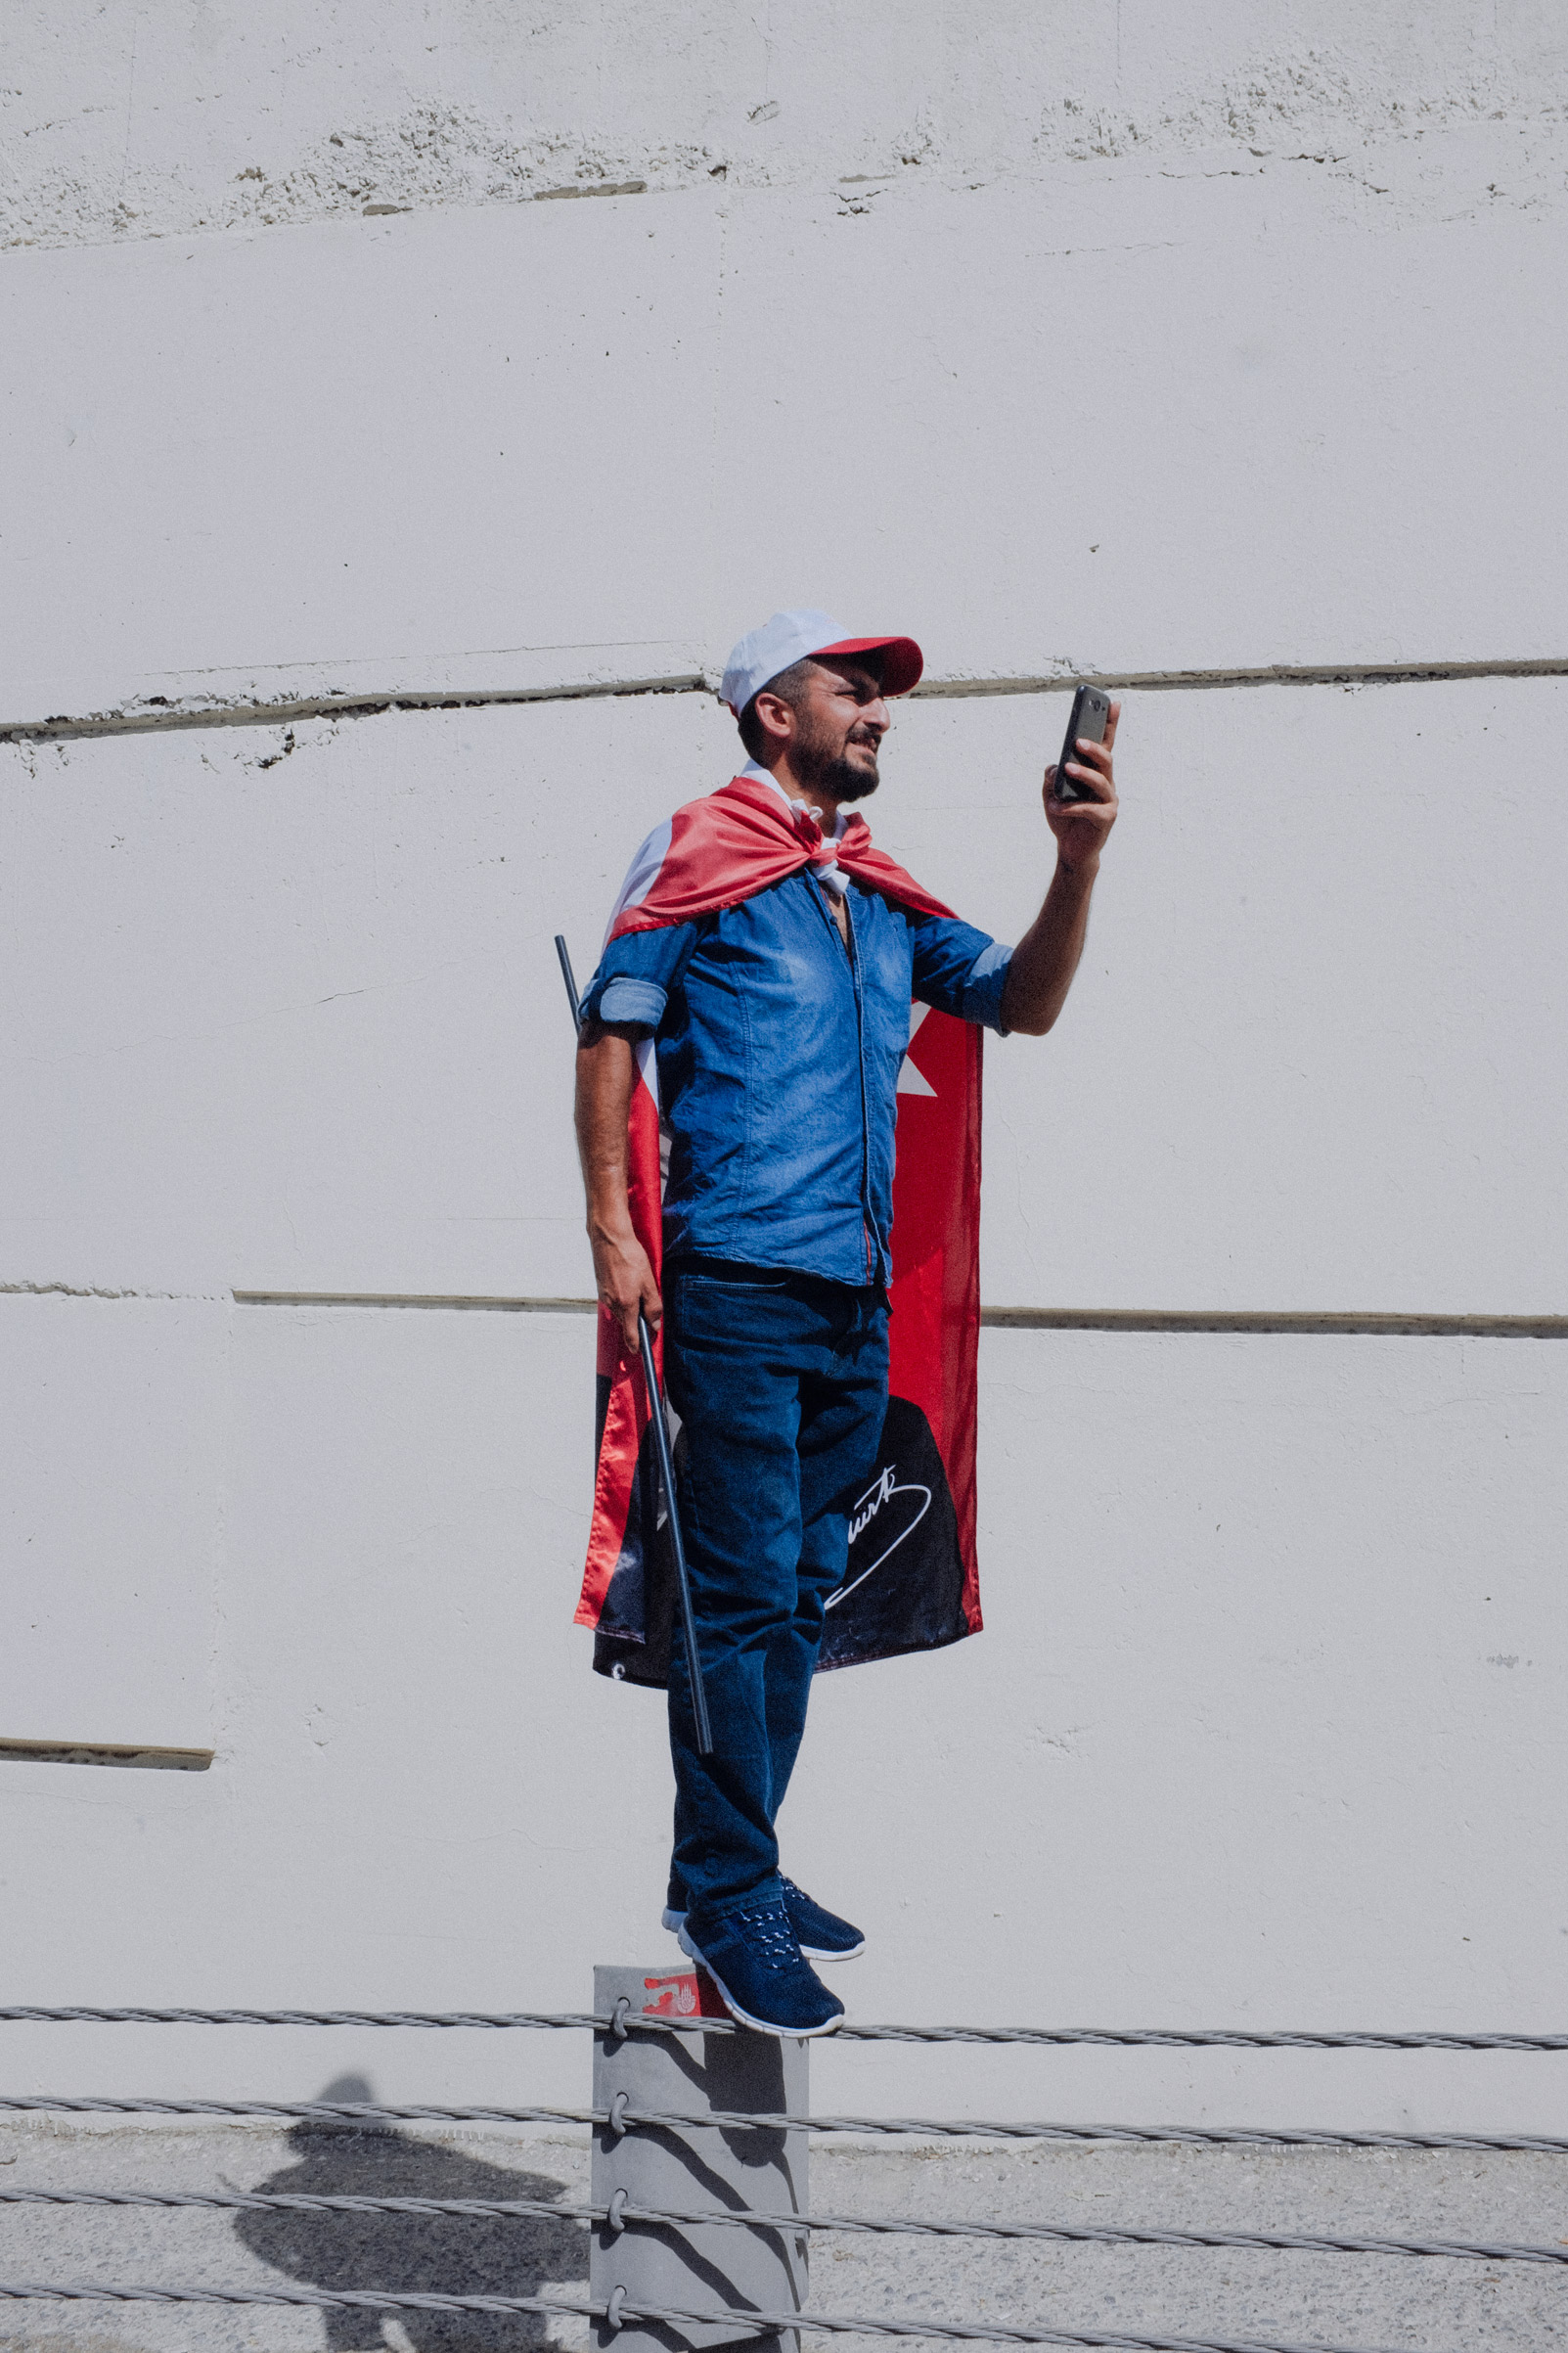 TURKEY. Istanbul. A man with a Turkish flag on, records the Justice march with his mobile phone near the highway.